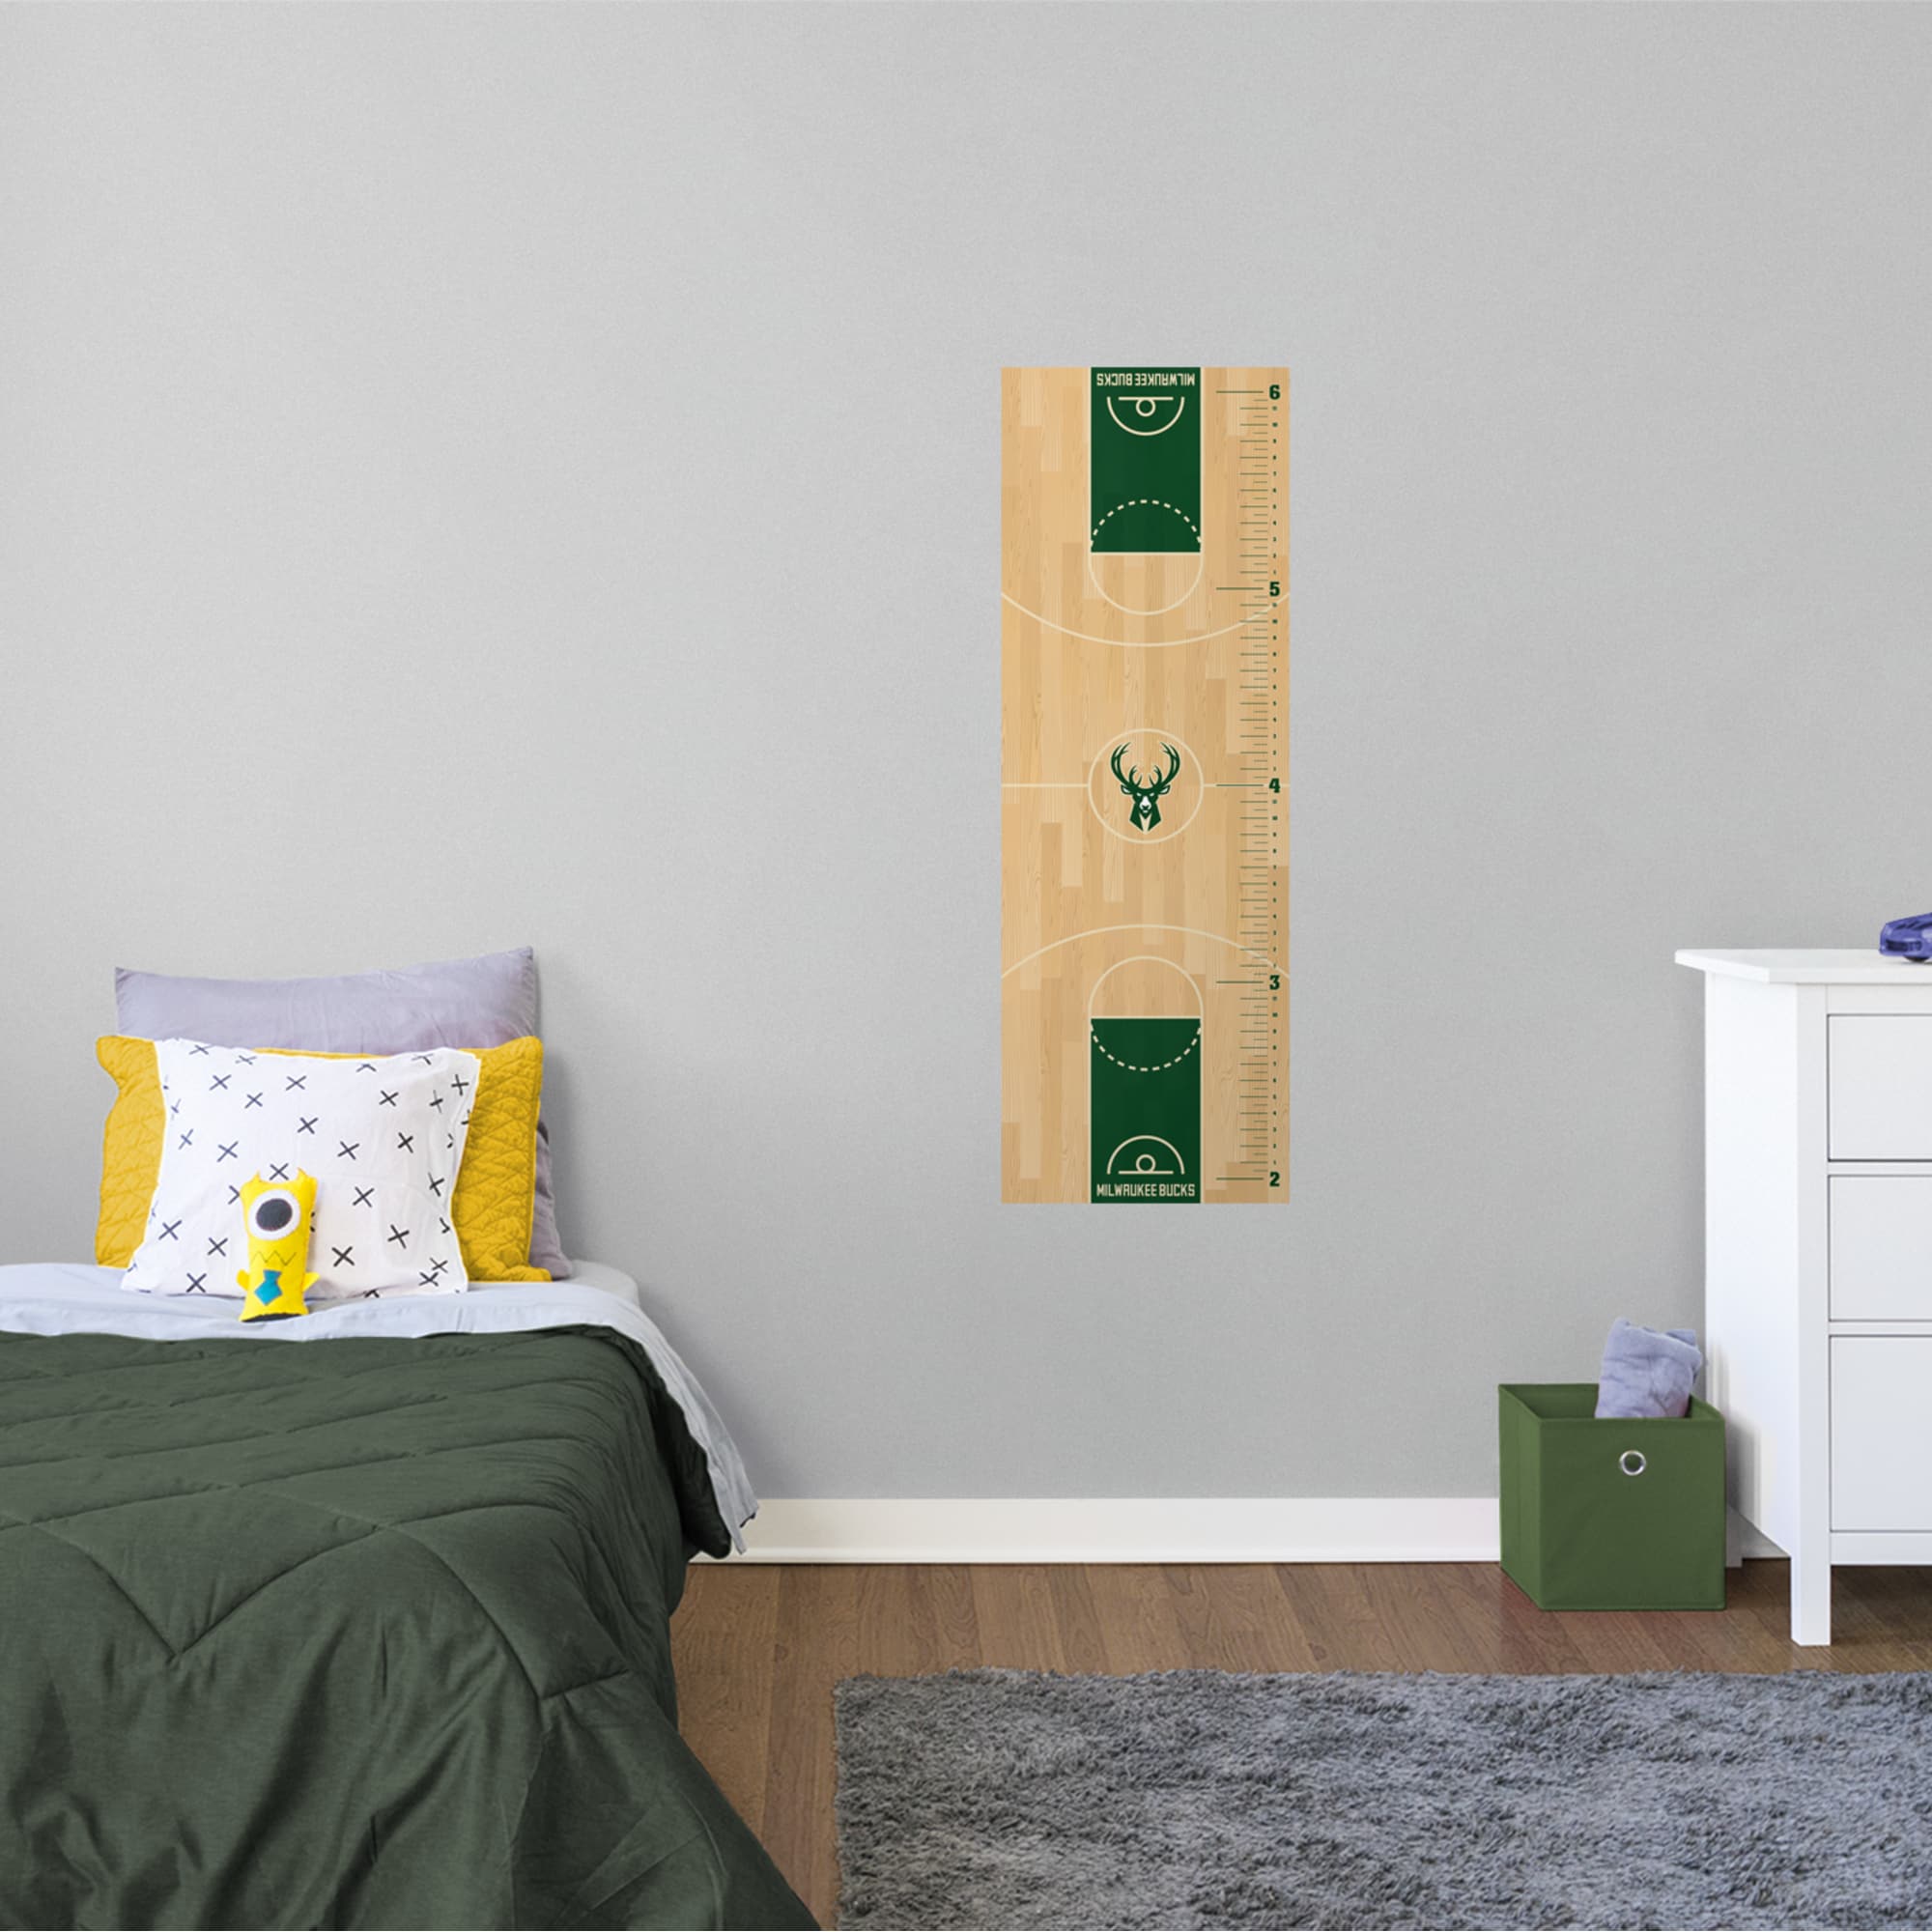 Milwaukee Bucks: Growth Chart - Officially Licensed NBA Removable Wall Decal 17.5"W x 51.0"H by Fathead | Vinyl